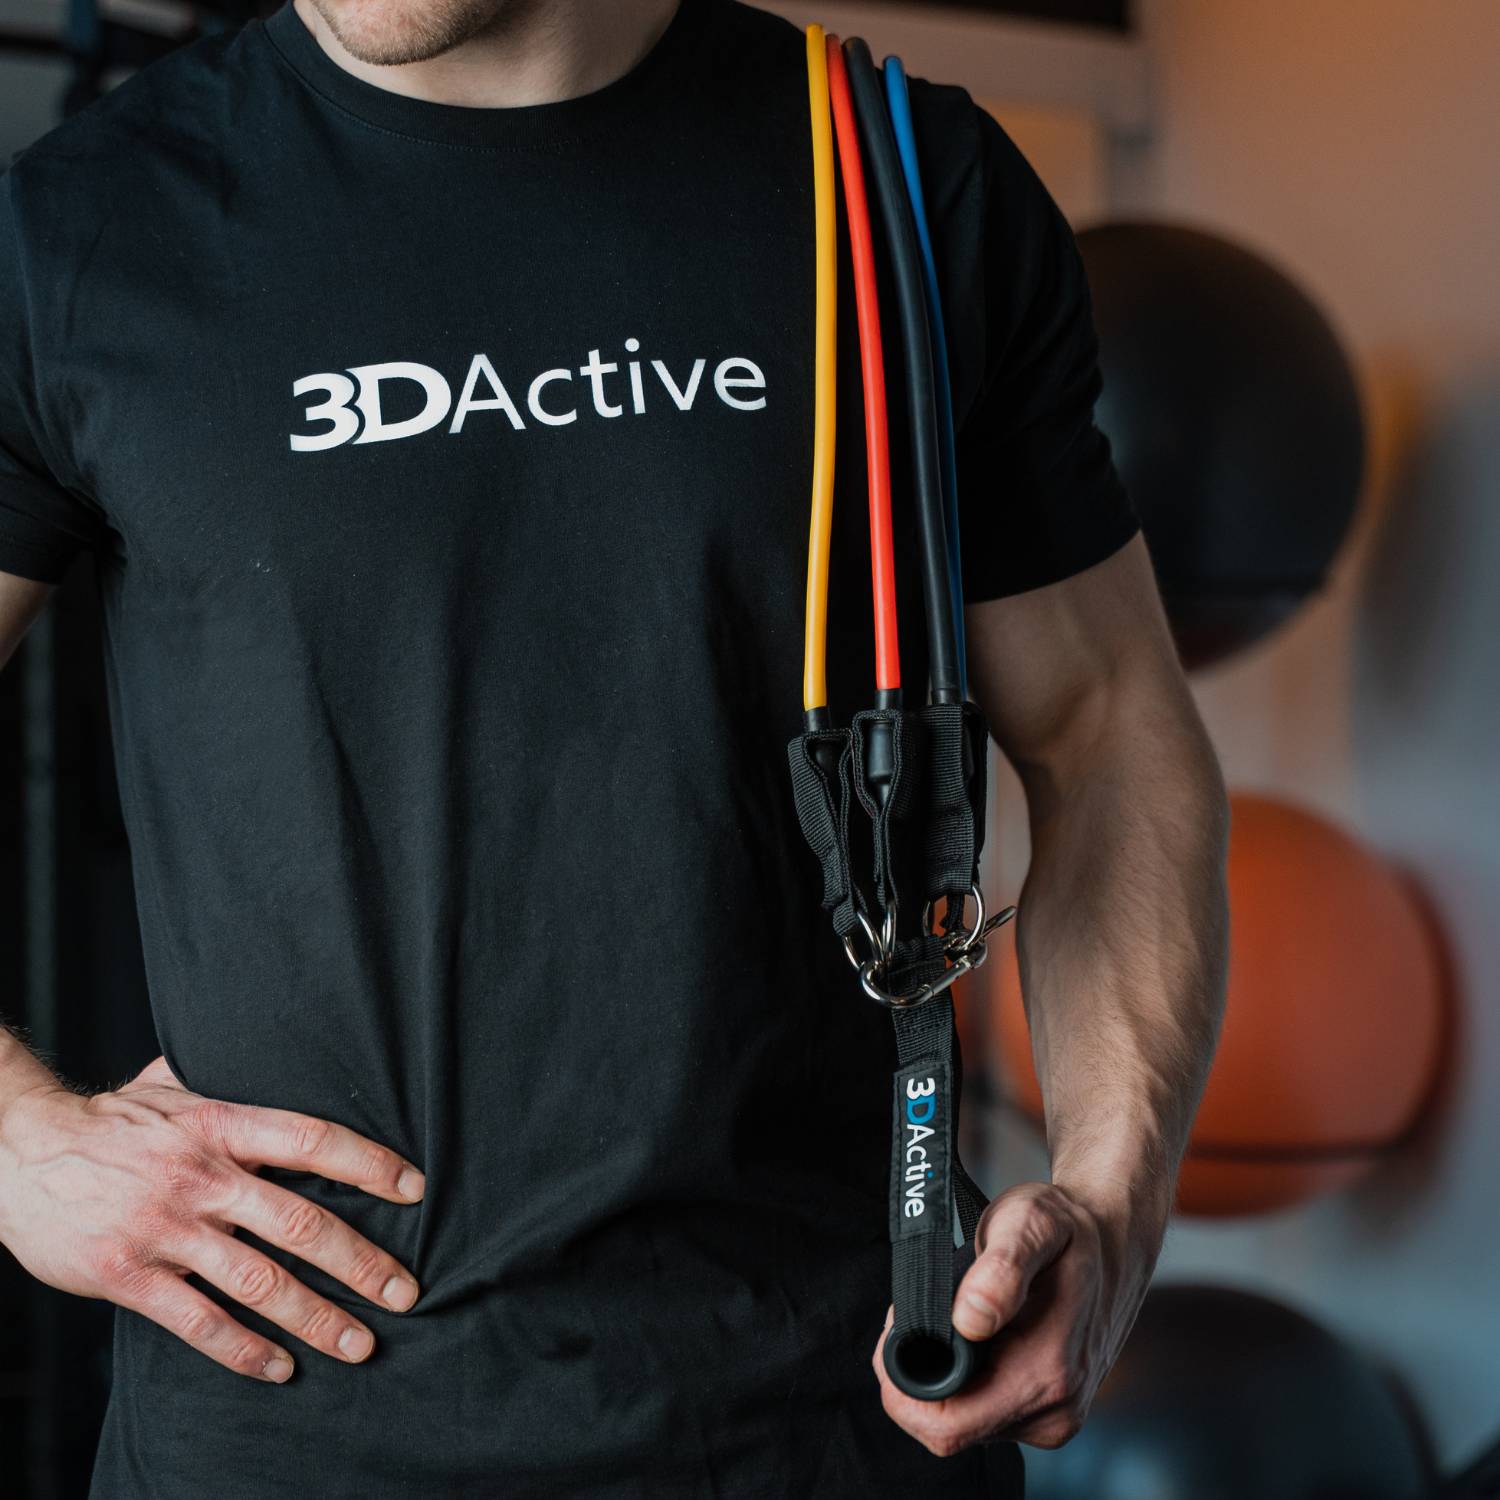 man holding set of 3DActive resistance bands in the gym